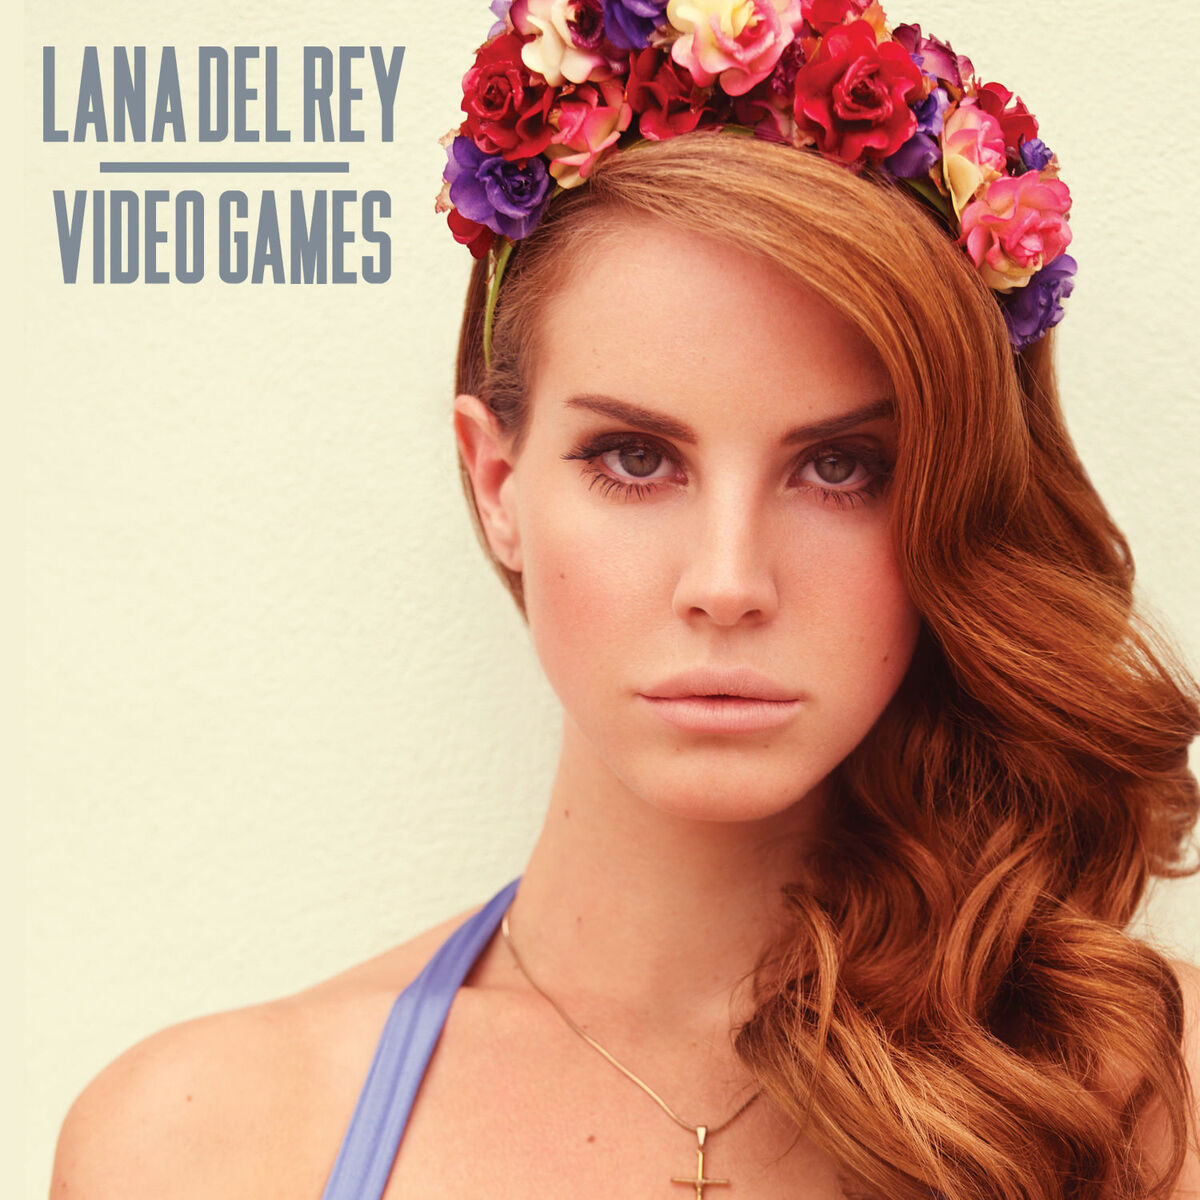 Video Games - song and lyrics by Lana Del Rey